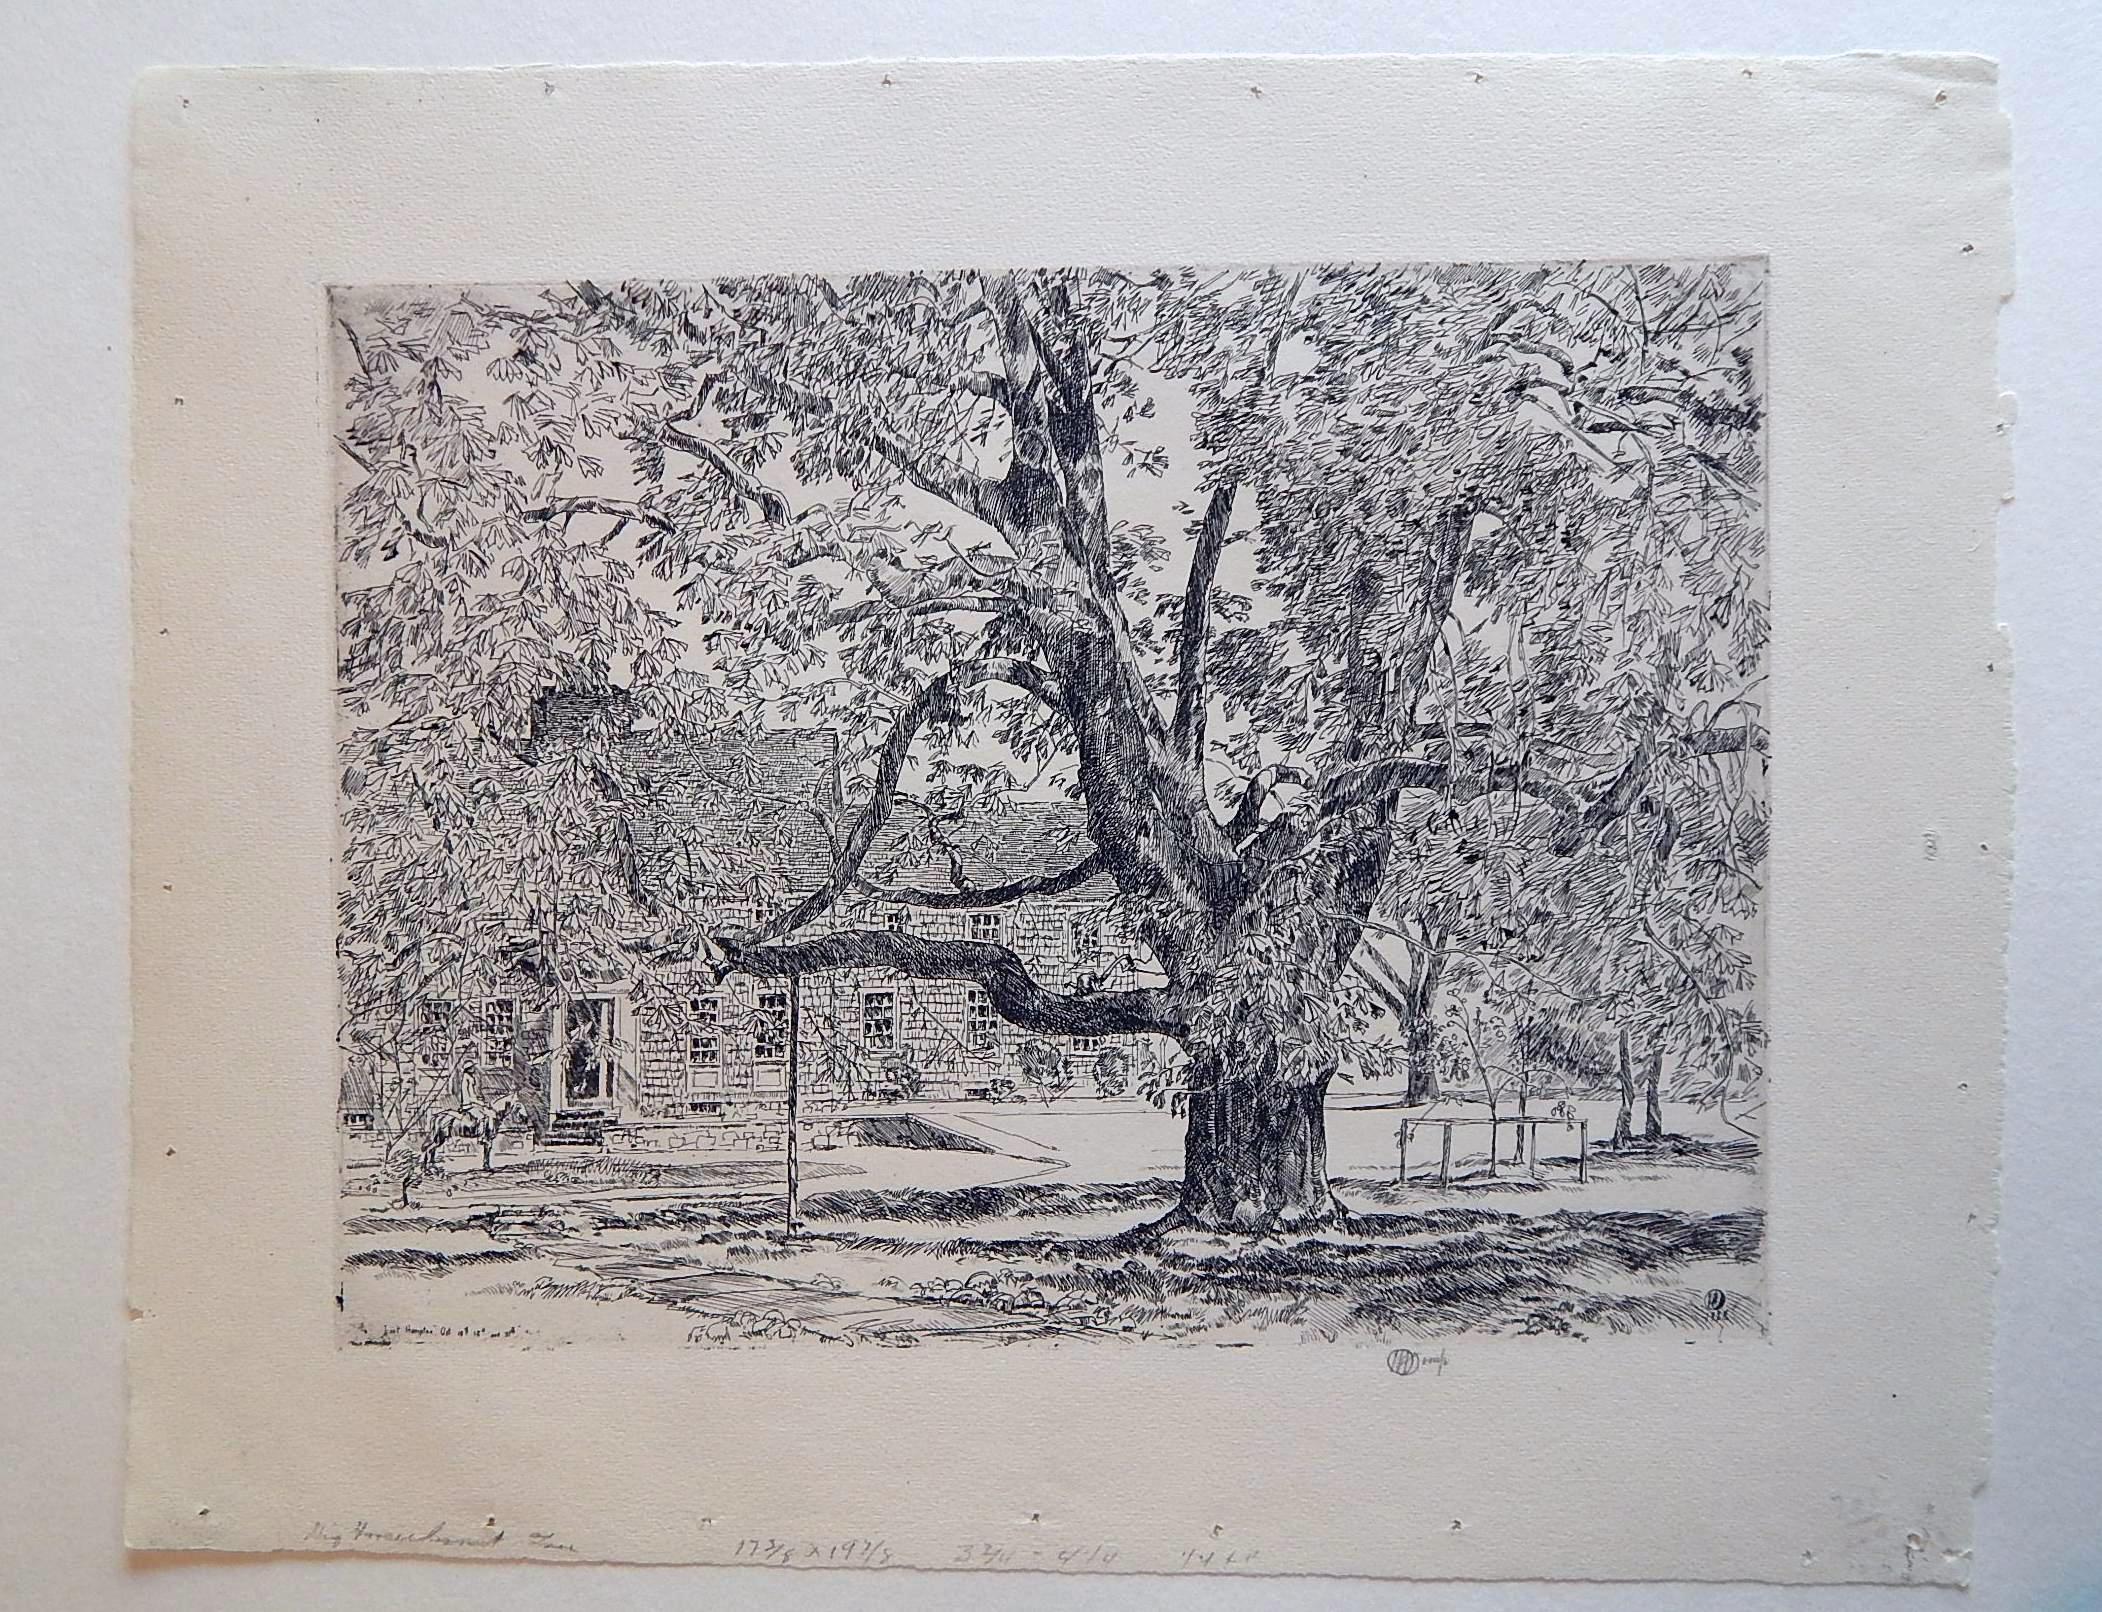 Original Etching by Childe Hassam (1859 - 1939). Created 1928.
Title: The Big Horse Chestnut Tree
Signed with the cypher and inscribed “imp” in pencil in the margin lower right.
Also signed, dated and titled in the plate. Pencil title lower left.